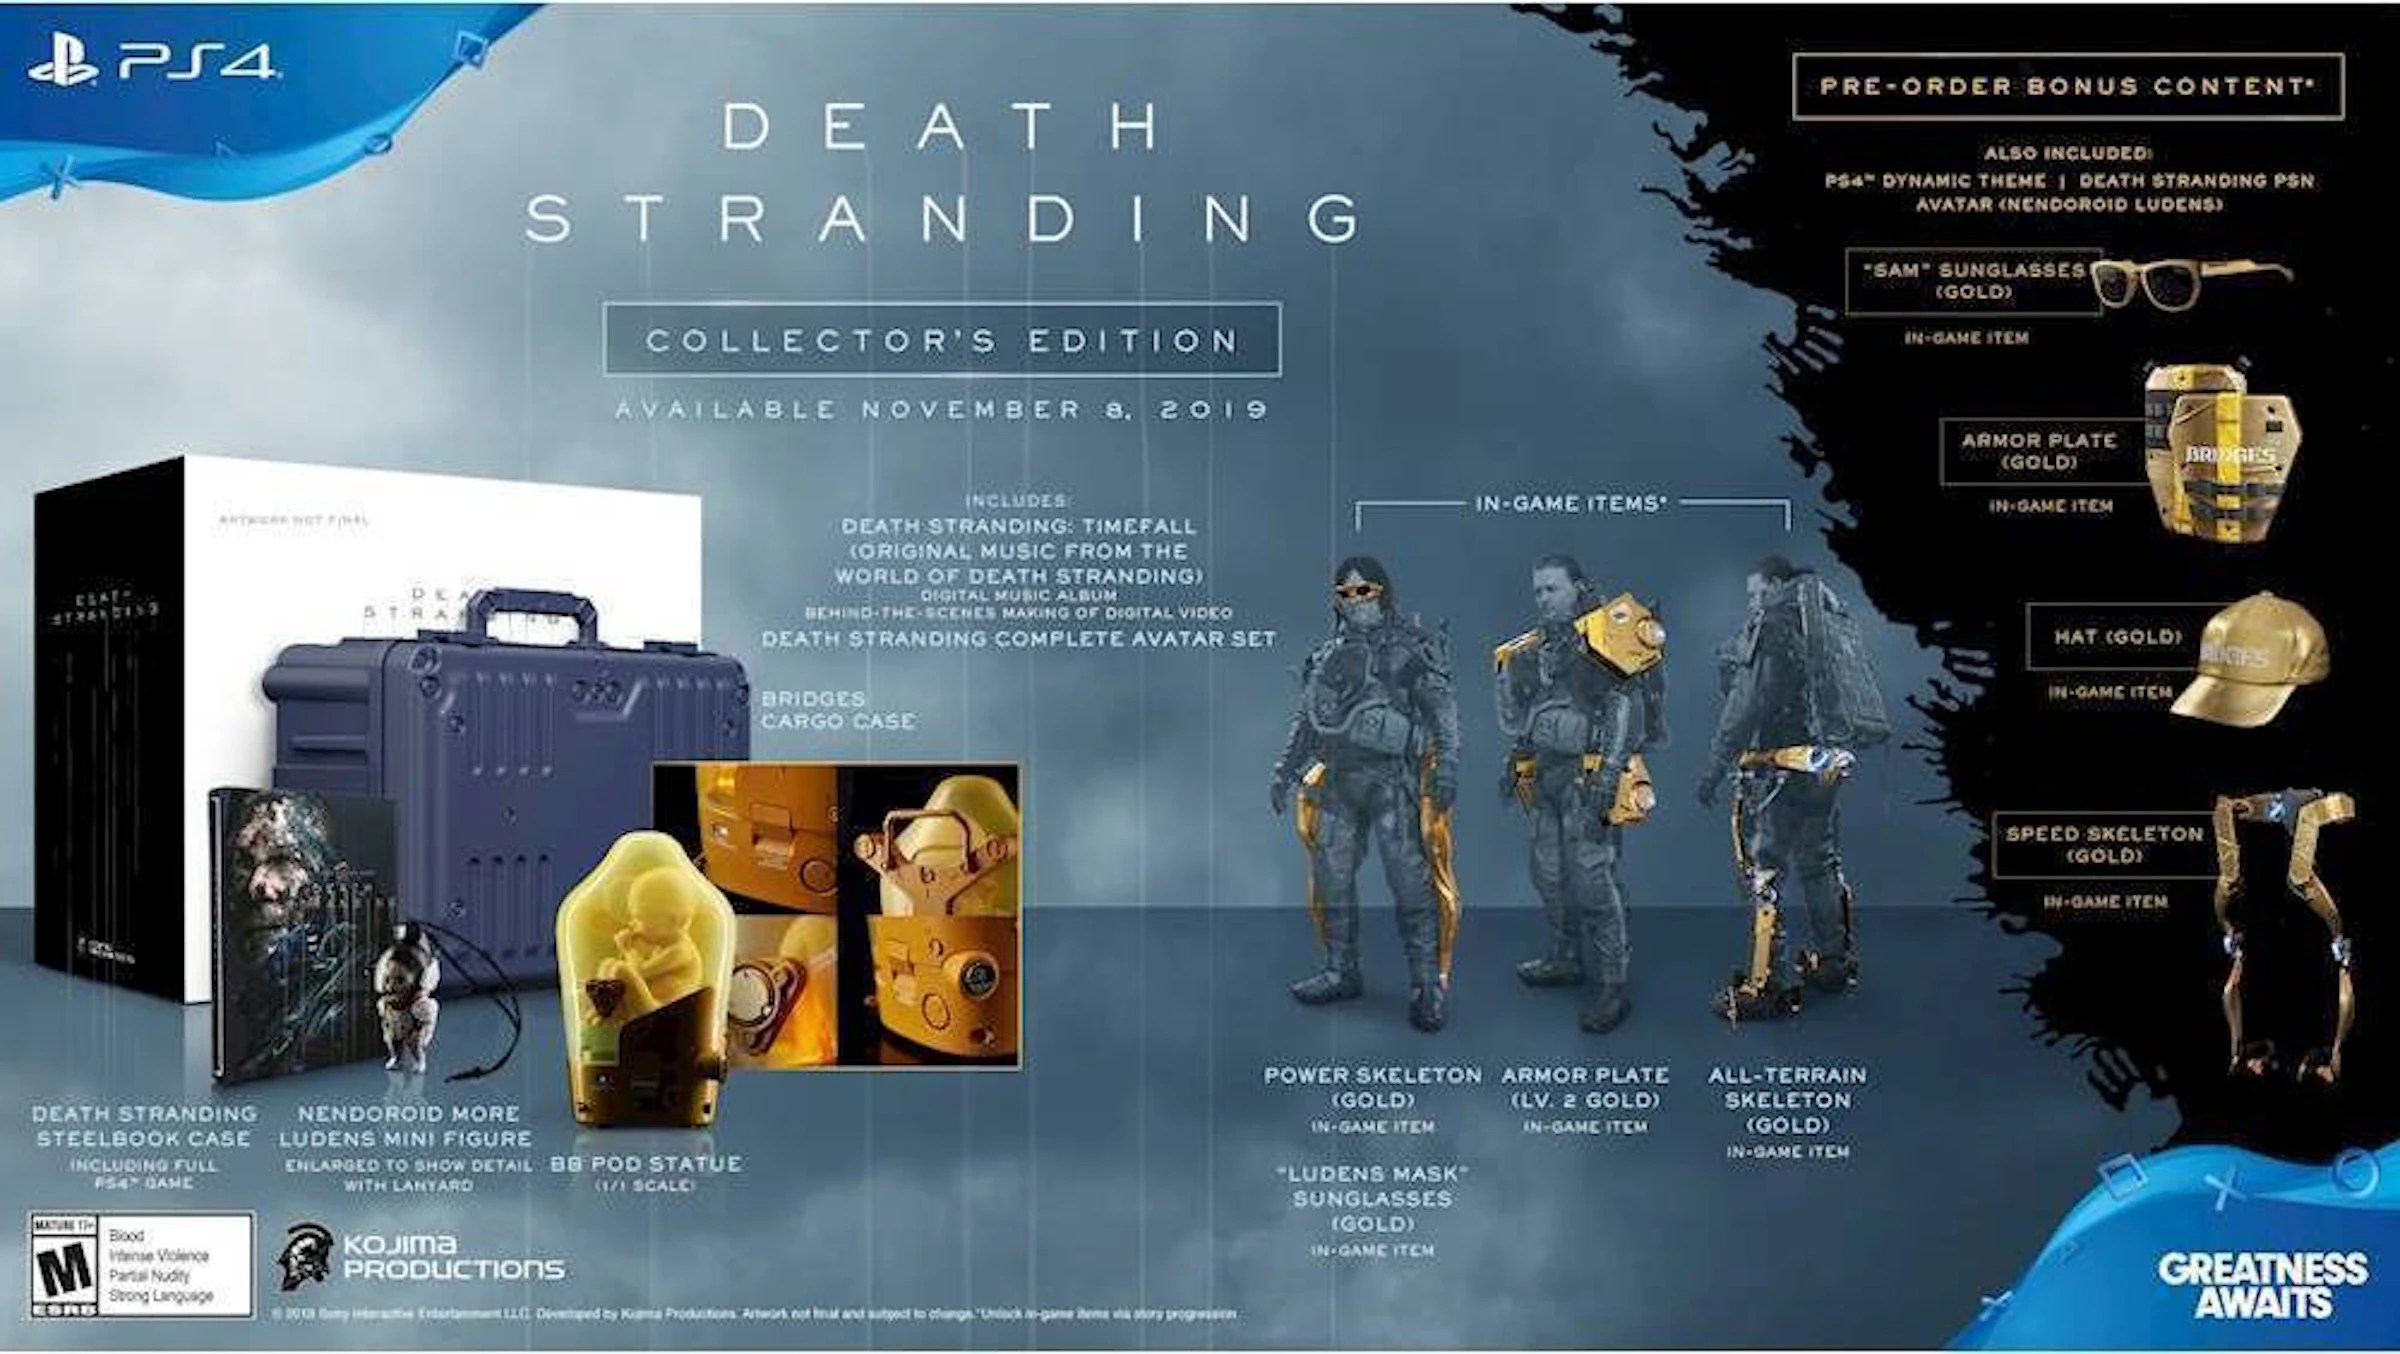 Sony PS4 Death Stranding Collecto'rs Edition Video Game Bundle - US